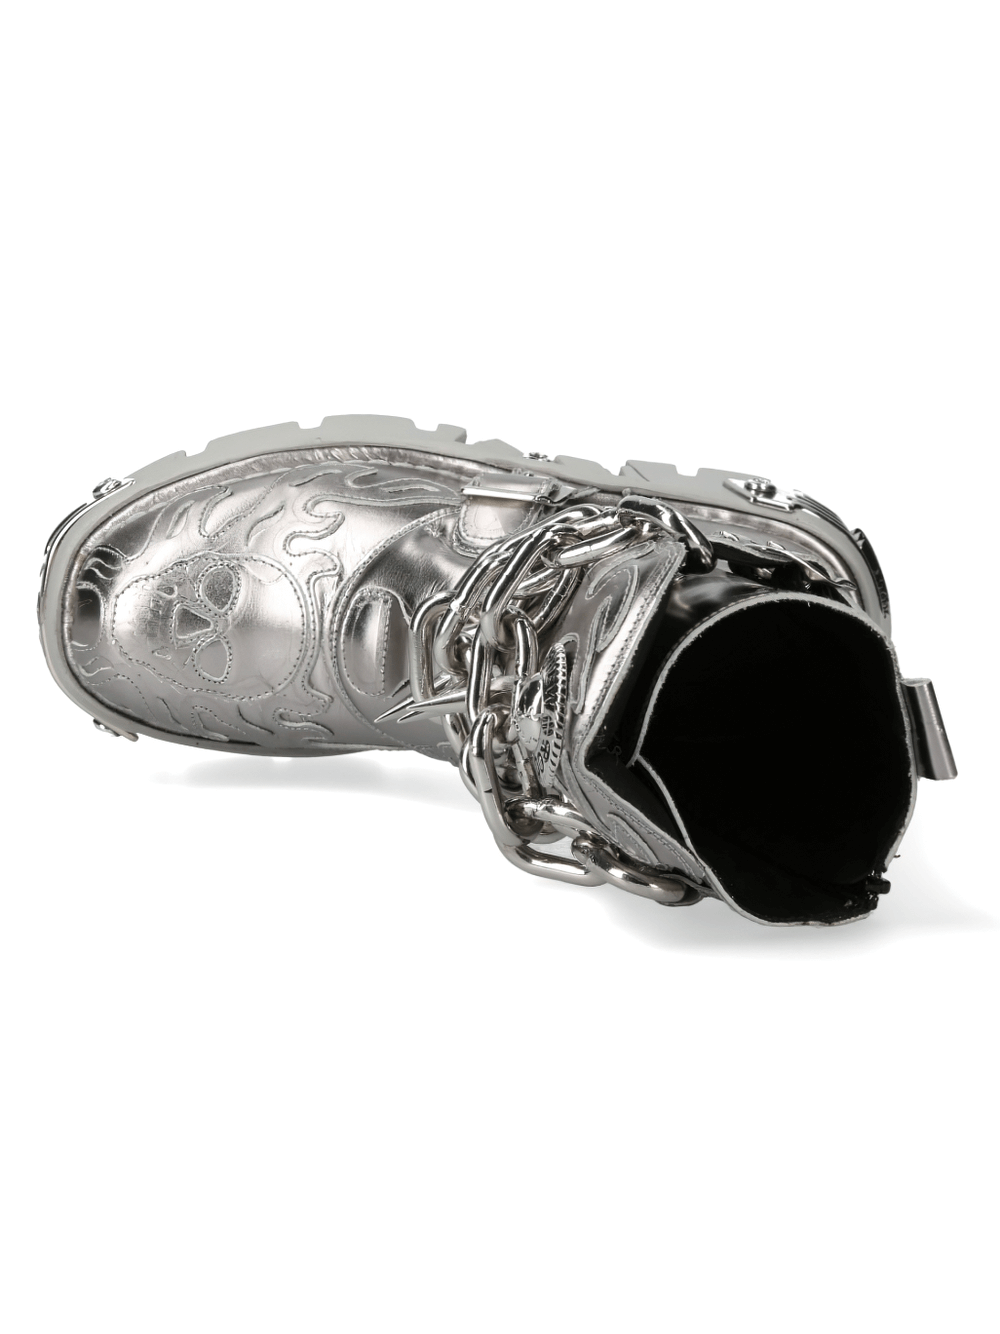 NEW ROCK Silver Metallic Chain Boots for Punk Fashion